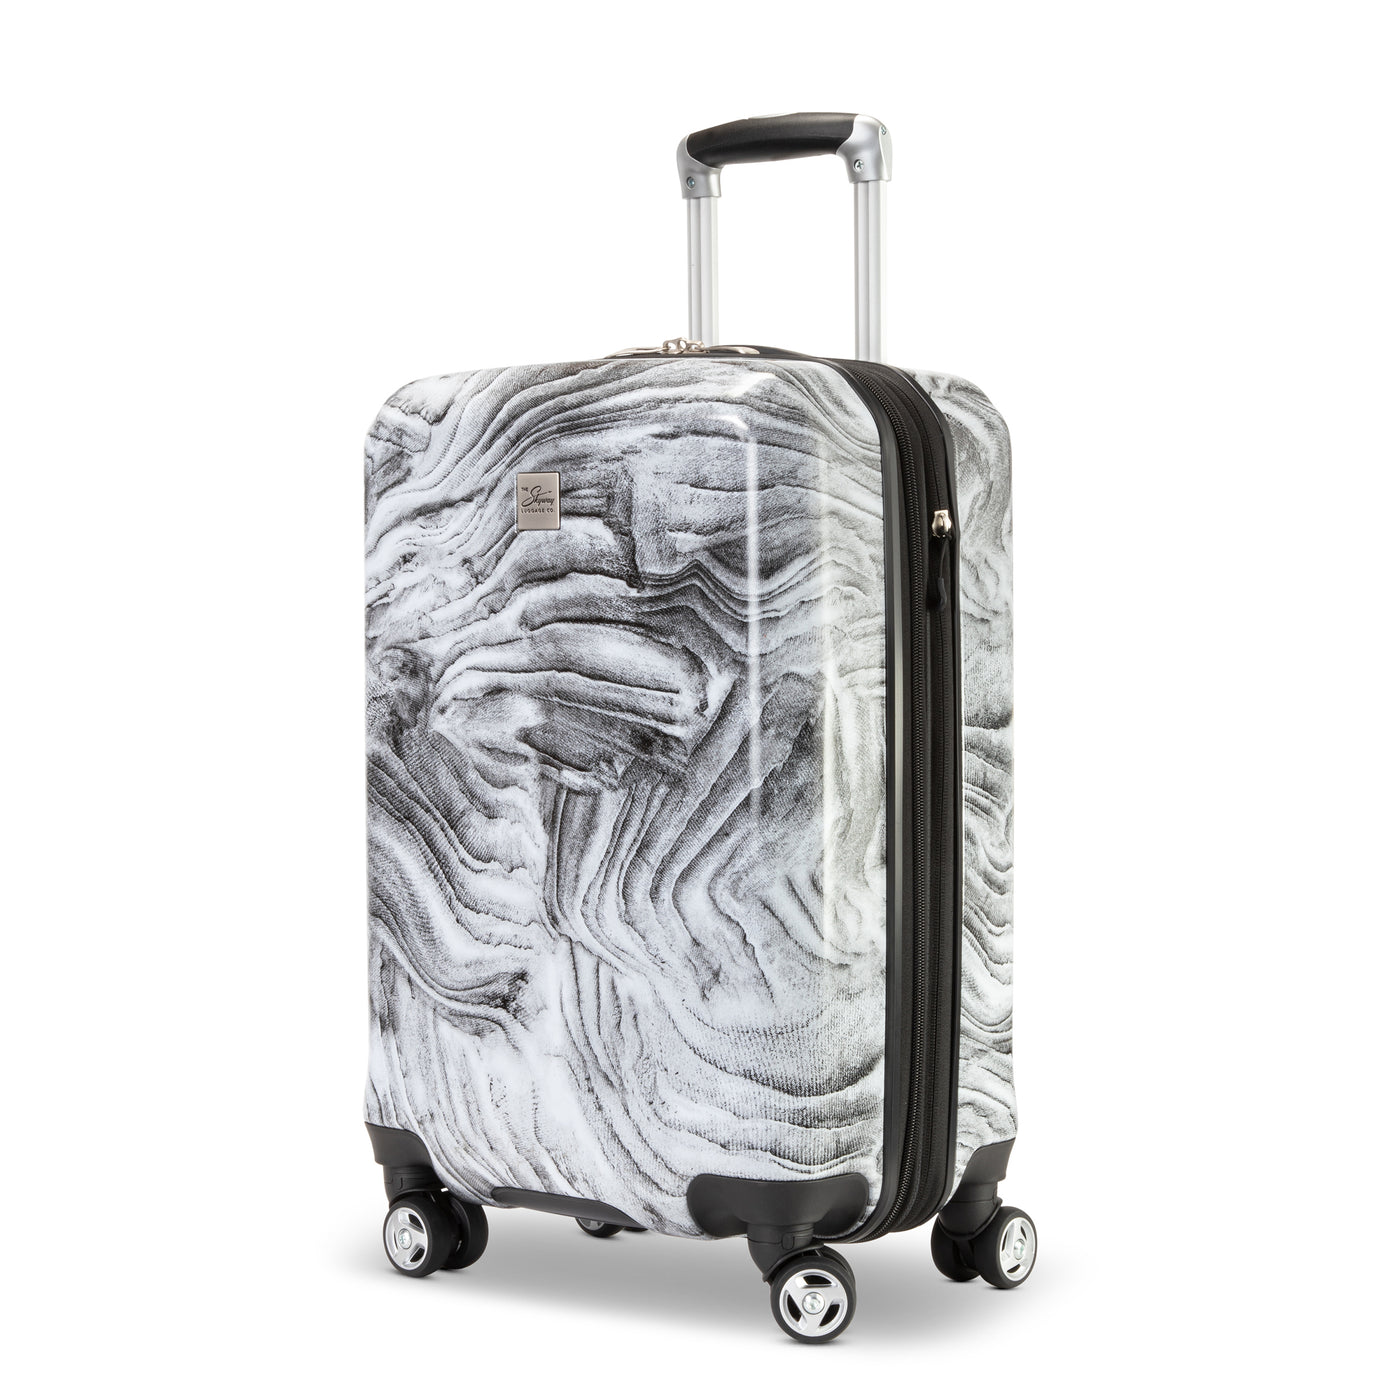 Nimbus 4.0 Sandstone Carry-On Expandable Spinner